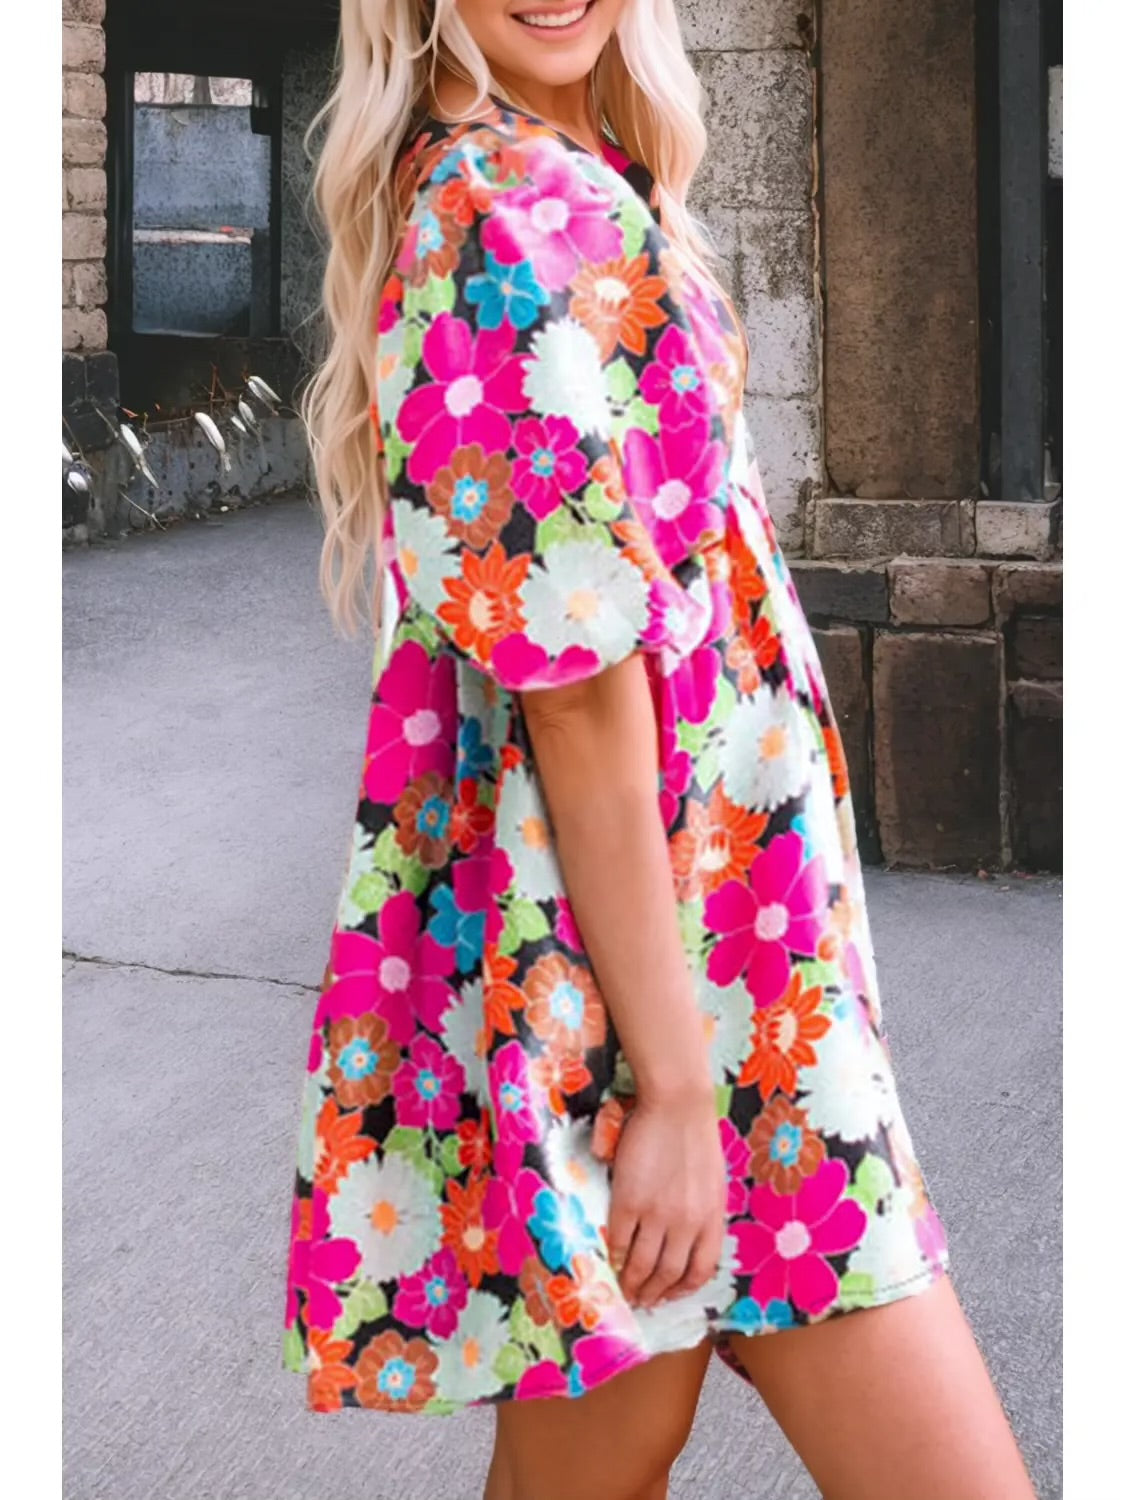 Floral Print Square Neck Short Puff
Sleeve Dress